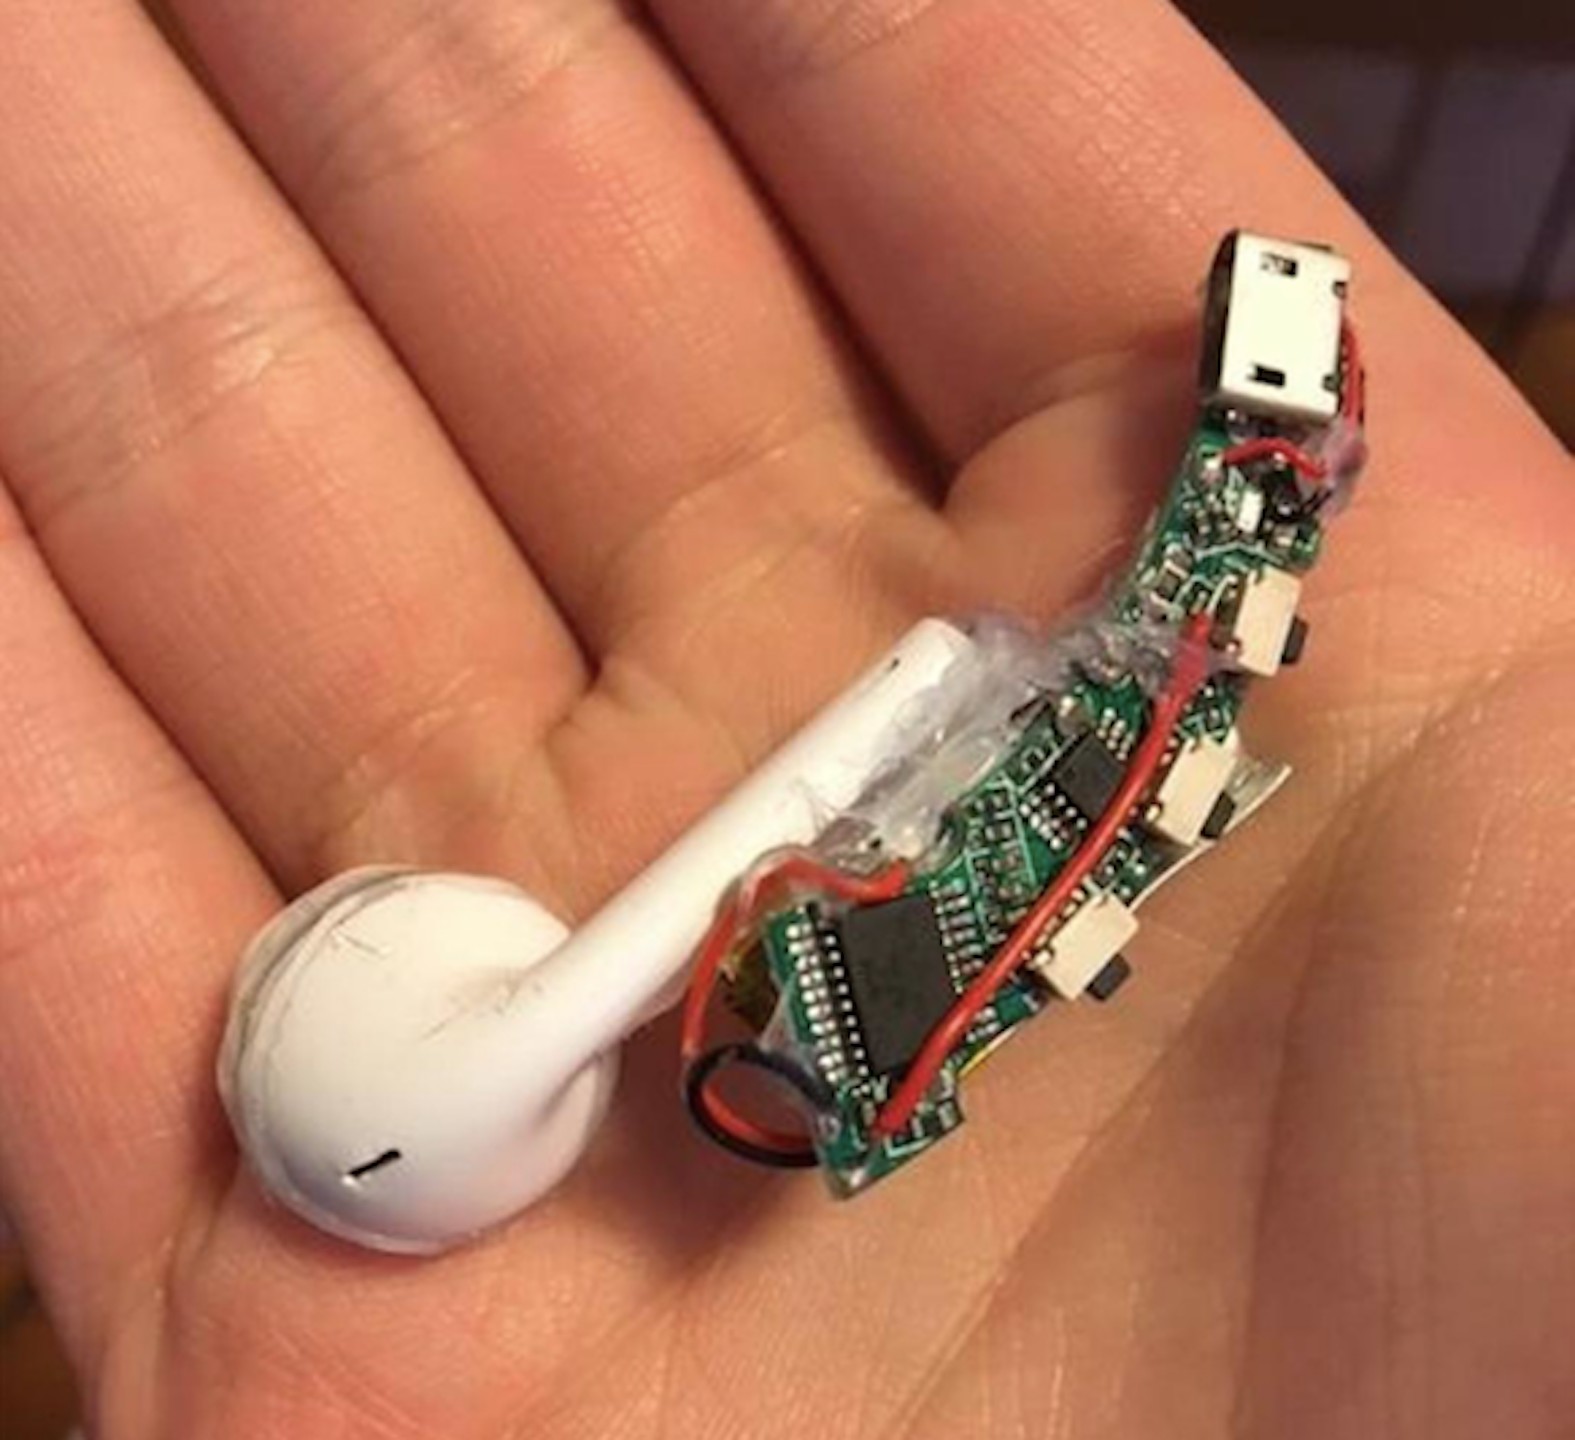 How To Make Your Own Airpods For 4